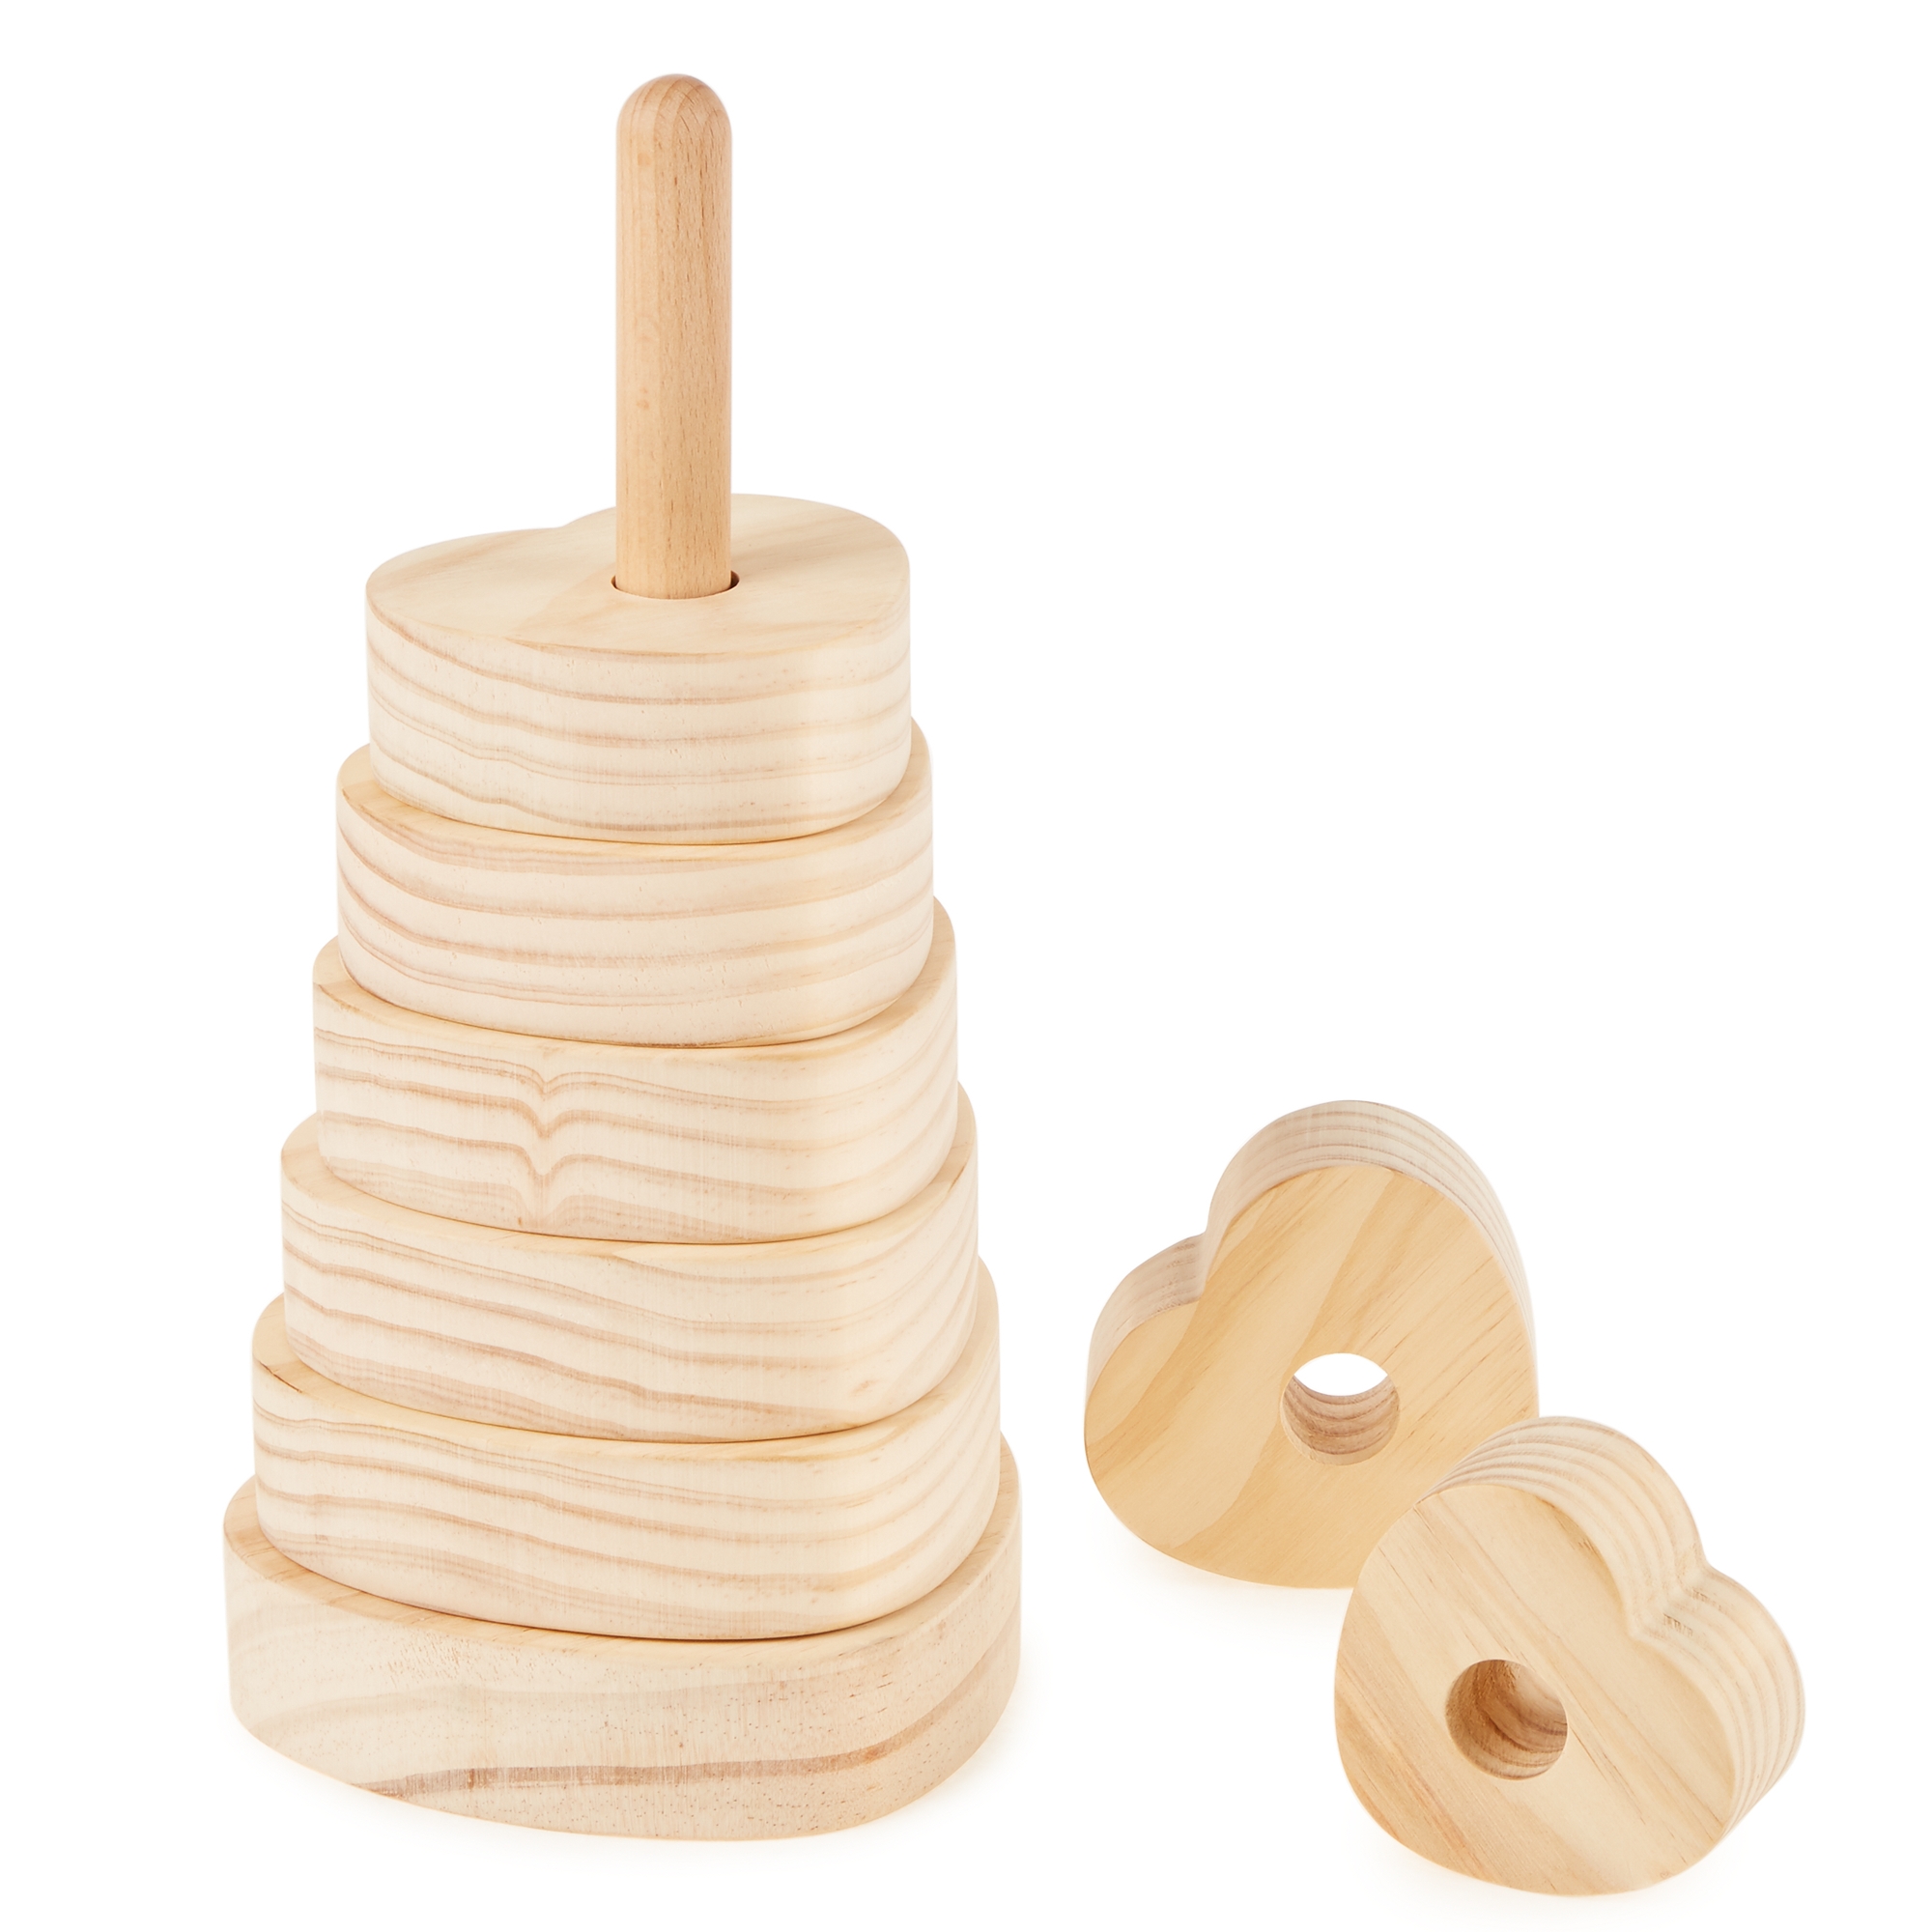 Wooden Heart Stacker from Hope Education